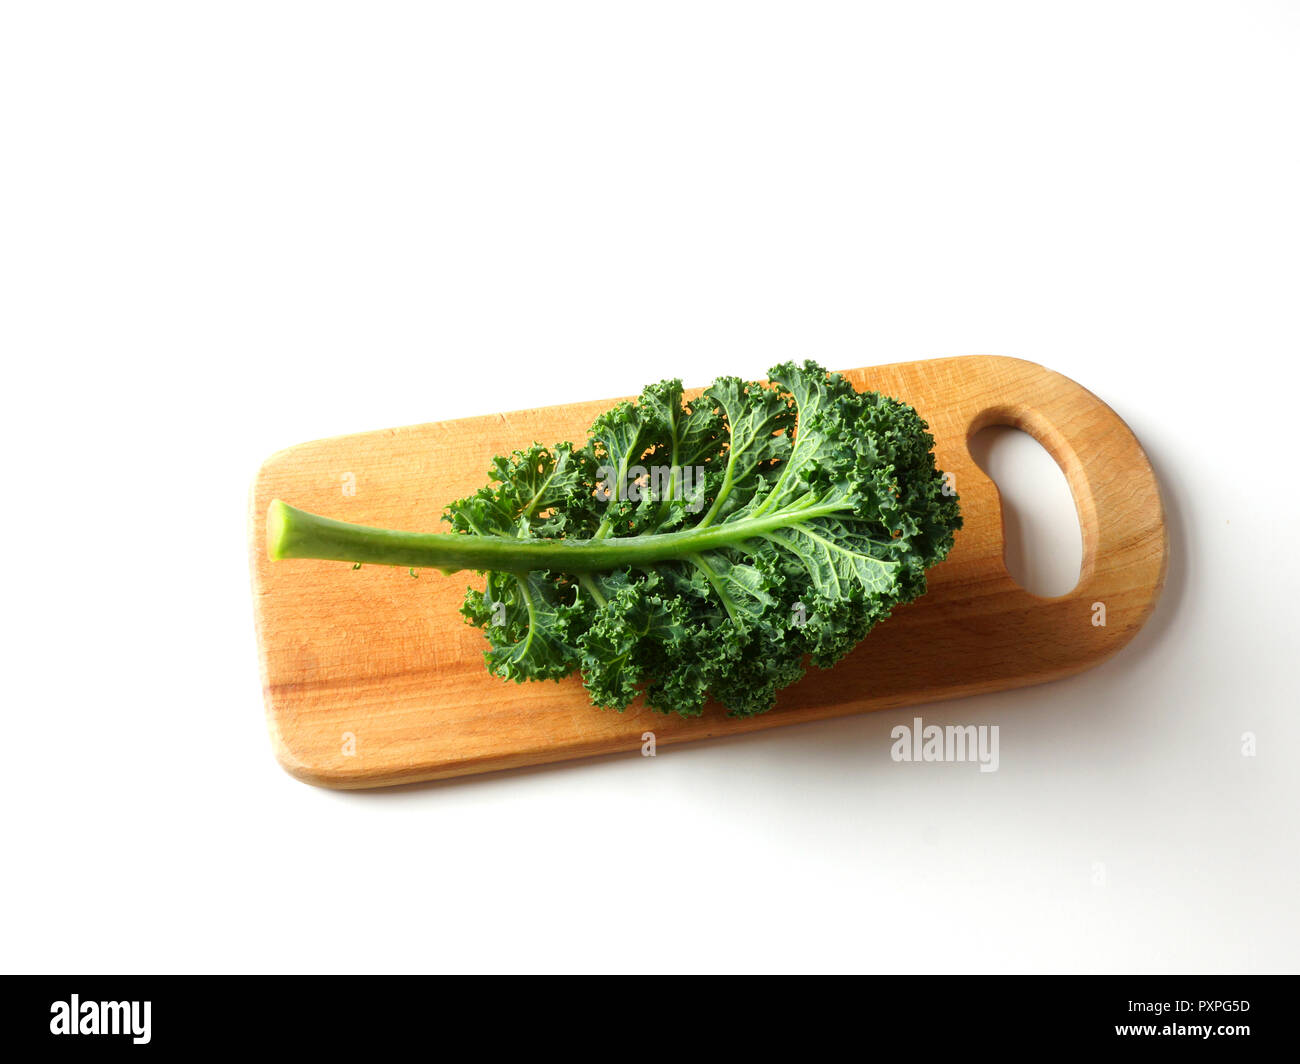 leaf of kale lies on a wooden cutting board. Blue Curled Vates Kale on a white background Stock Photo